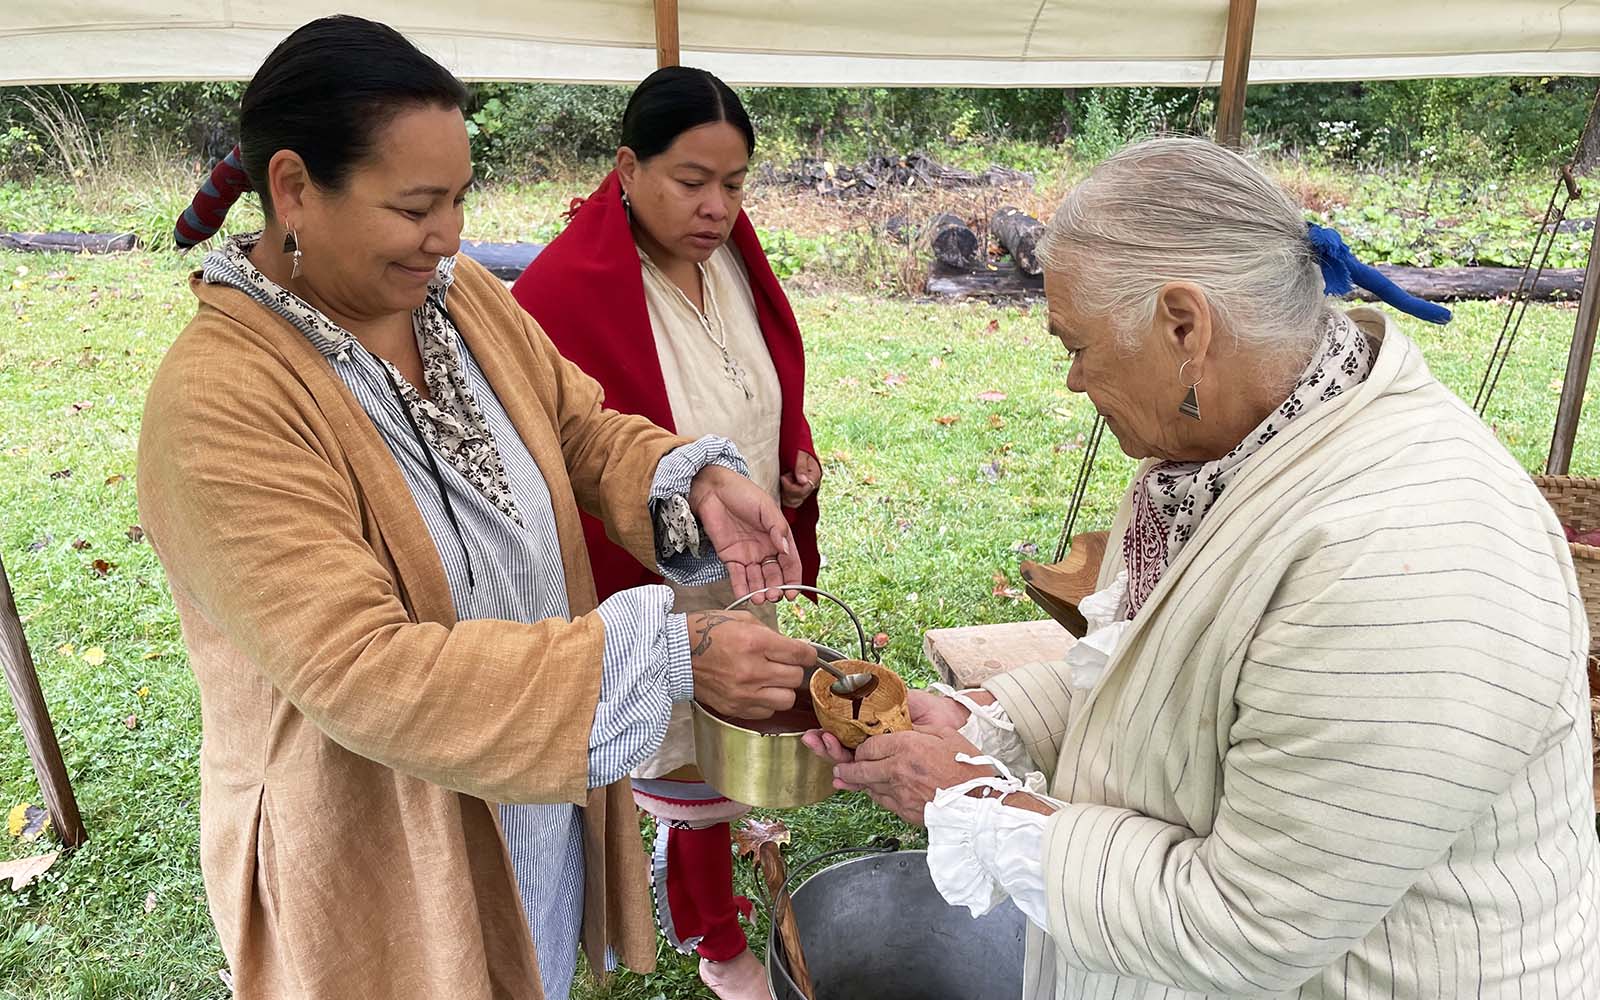 Members of local tribes share a recently brewed drink.